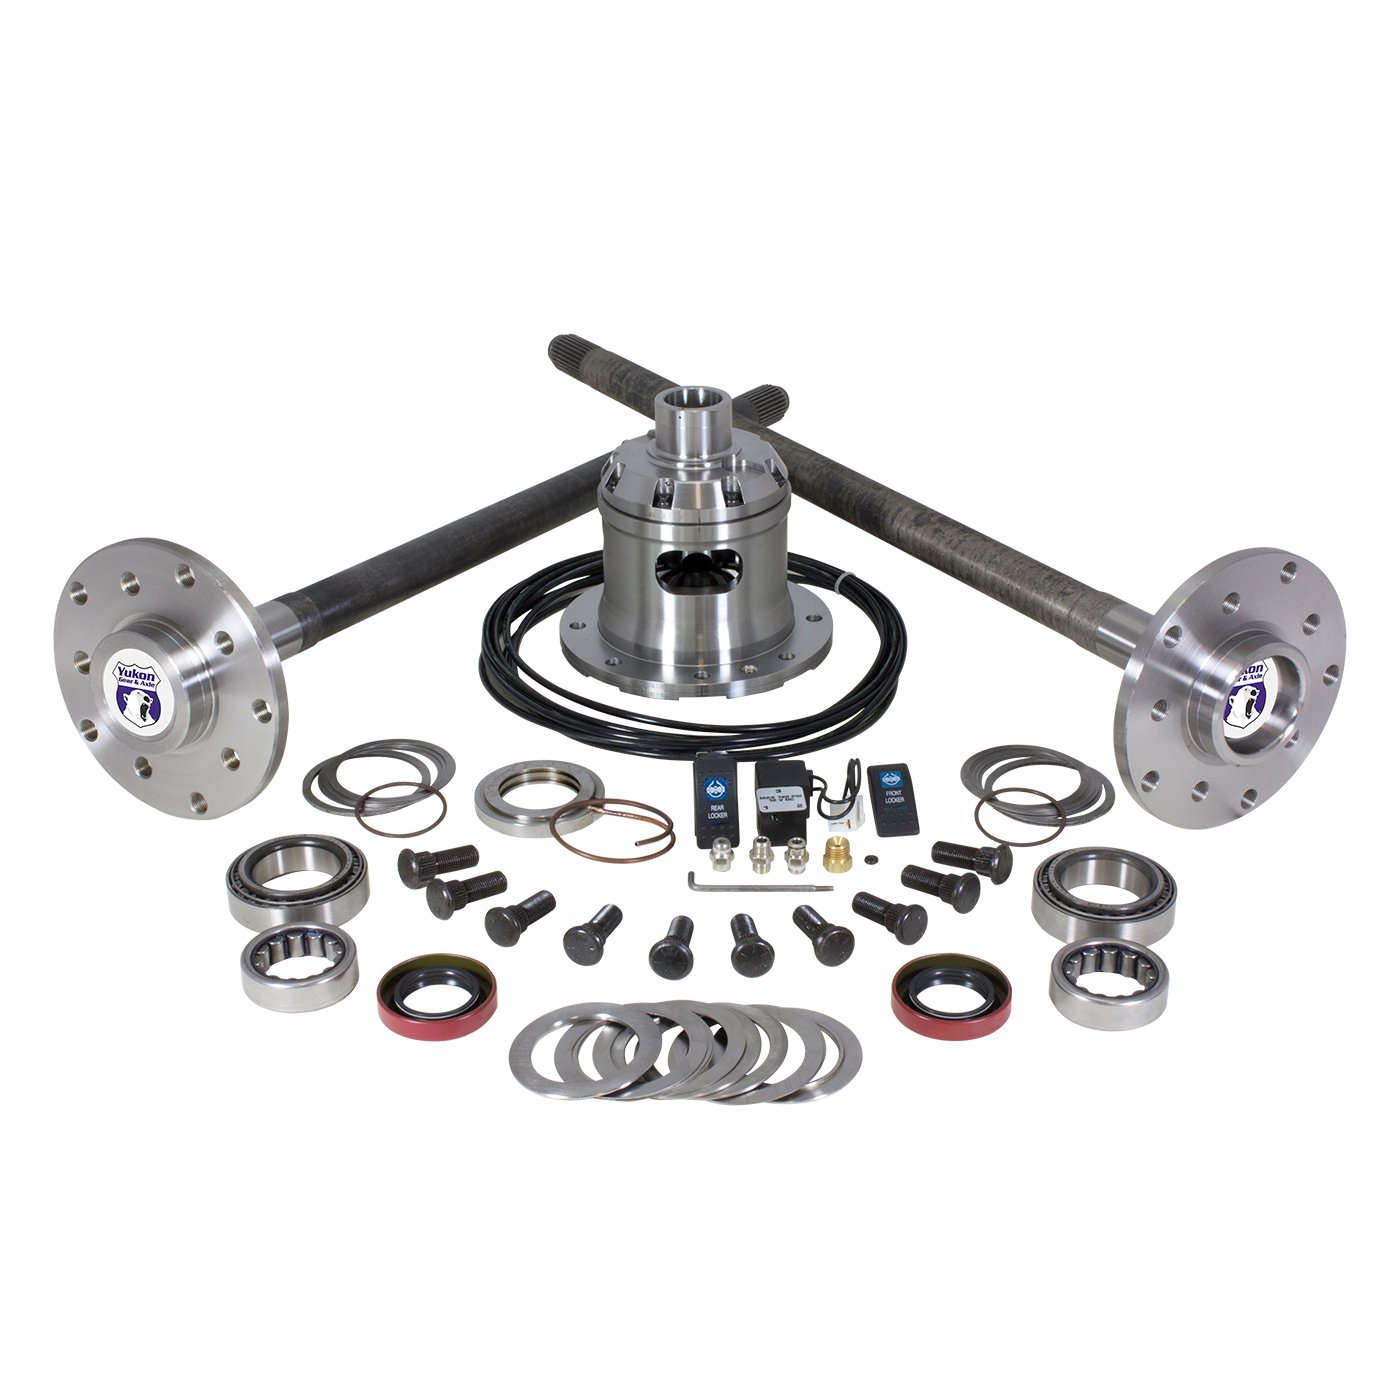 Ultimate 35 Axle Kit For Bolt-In Axles With Zip Locker